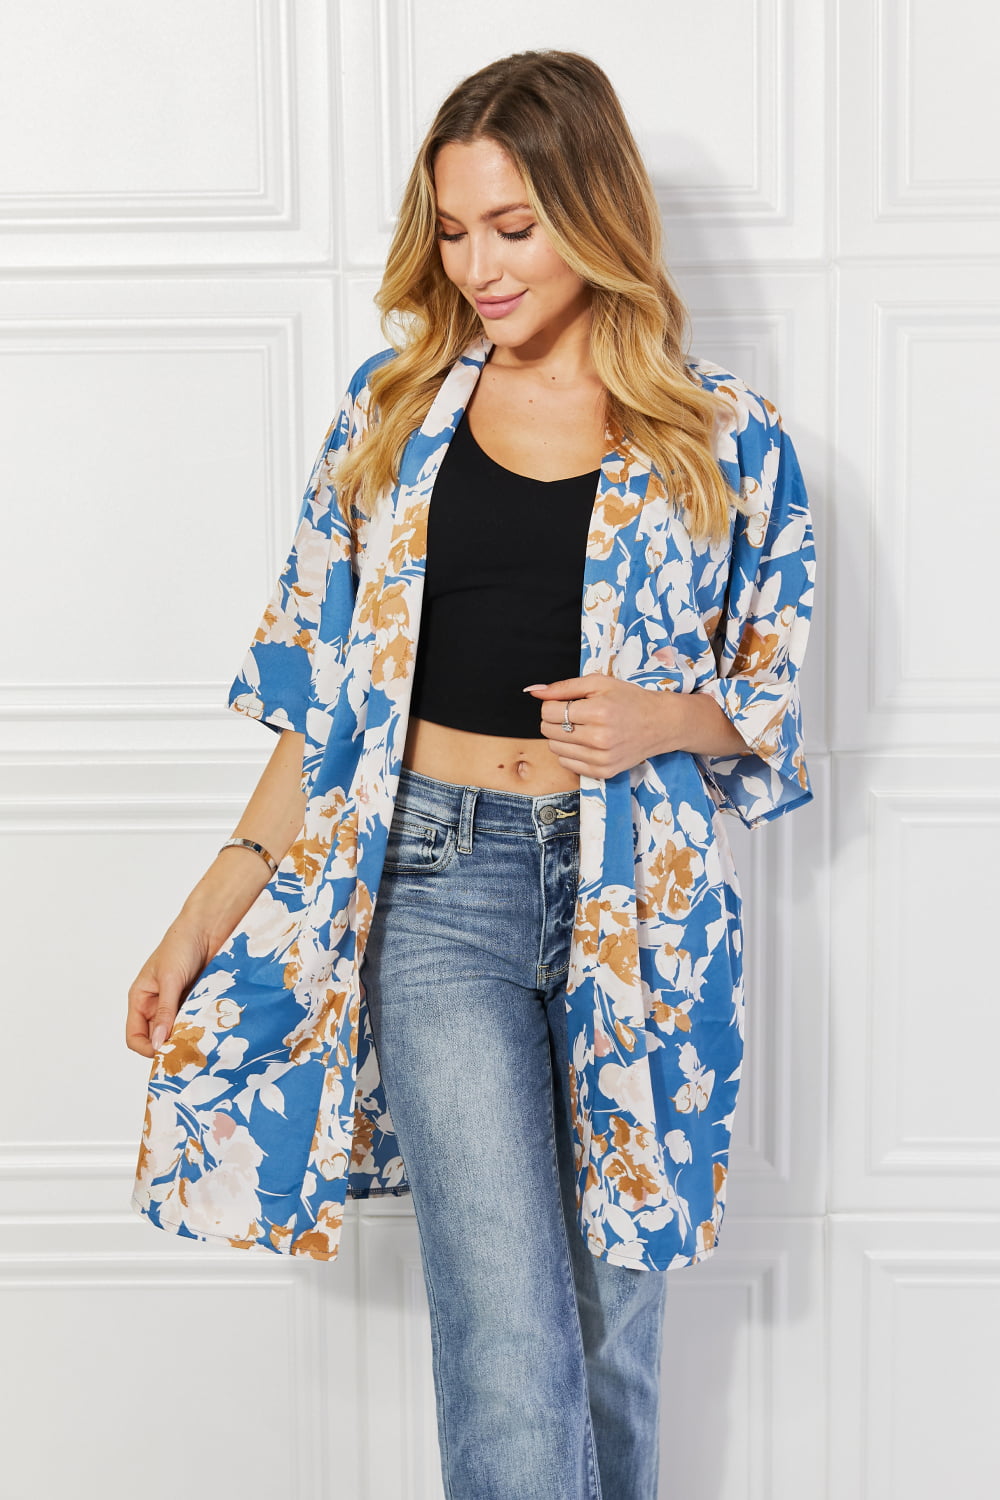 Justin Taylor Time To Grow Floral Kimono in Chambray - nailedmoms